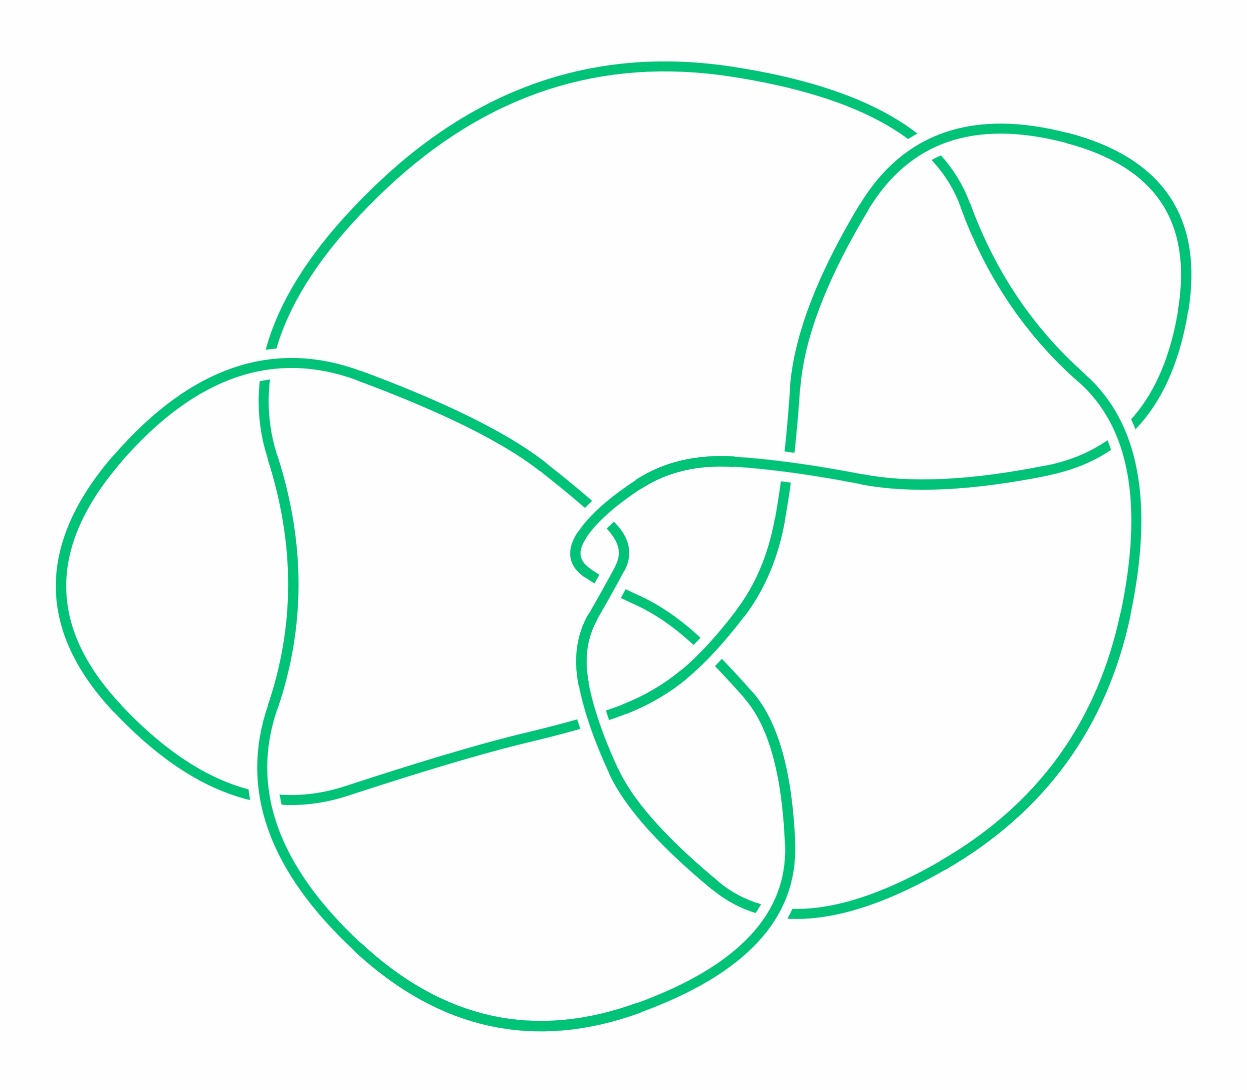 A knot diagram representing the second of the “Perko Pair” of knots